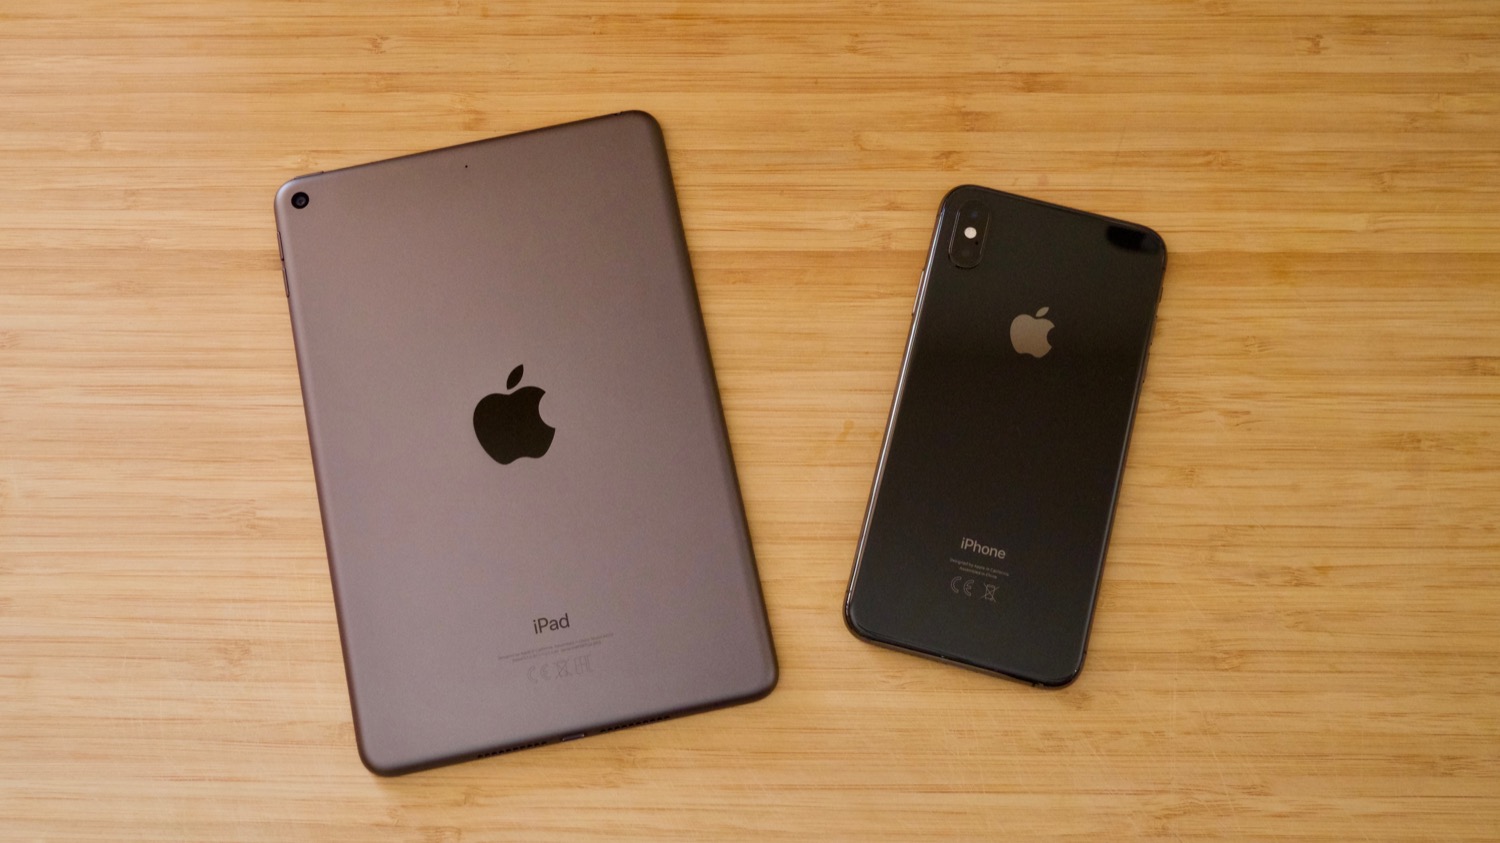 Review: The iPad mini (2019) is still a great iPad - The Mac Security Blog